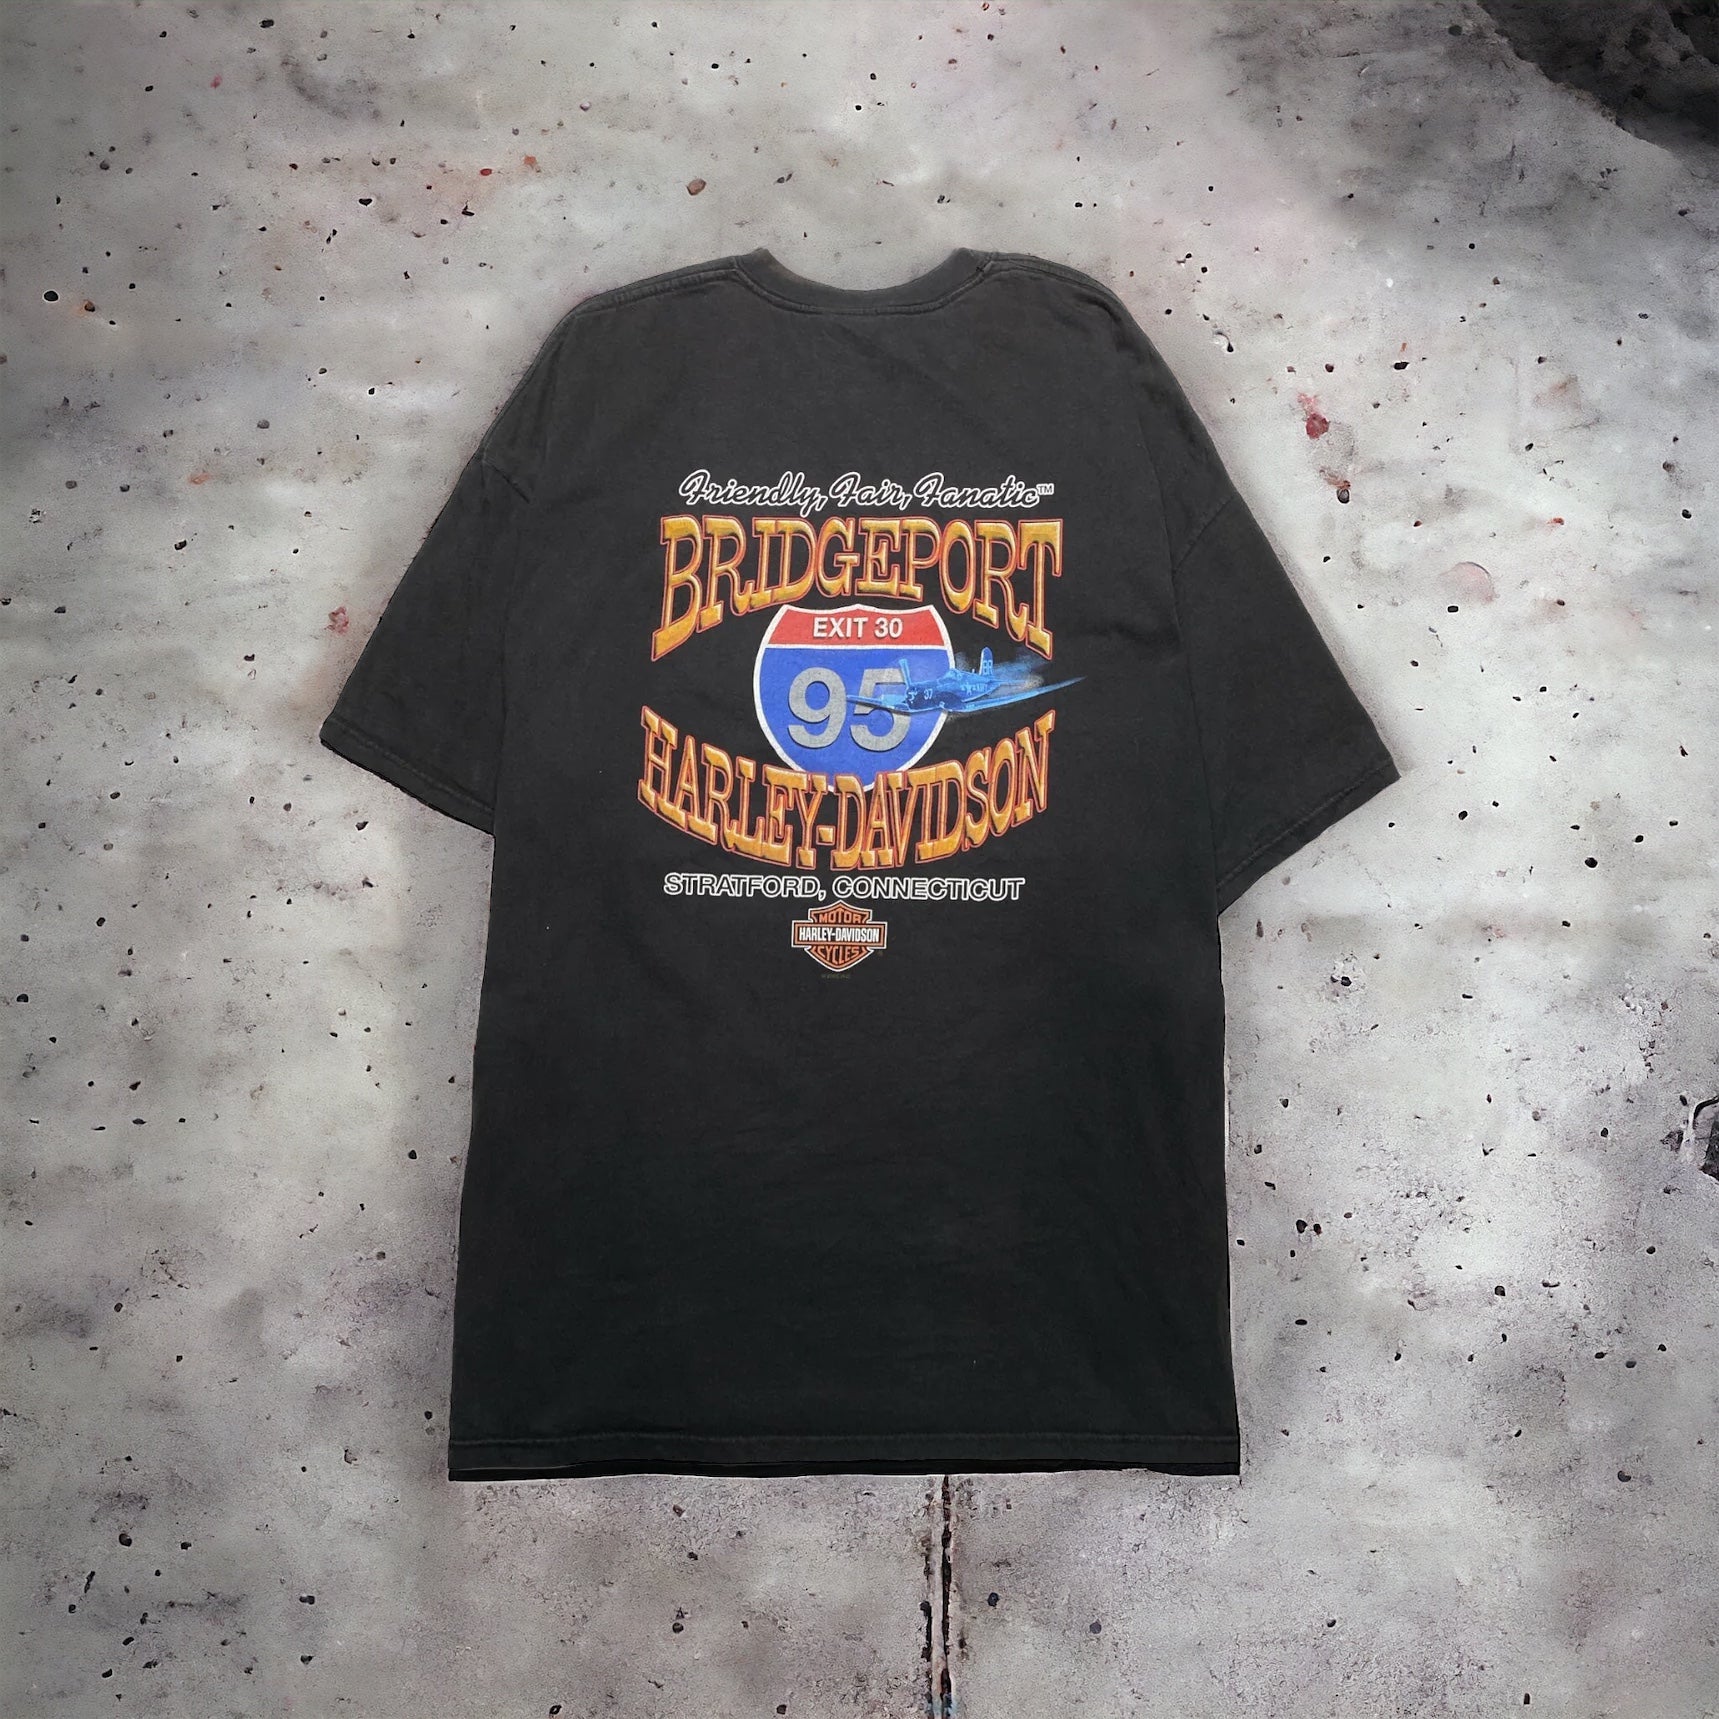 MOTOR HARLEY-DAVIDSON CYCLES Life begins when you get one Tee Made in USA